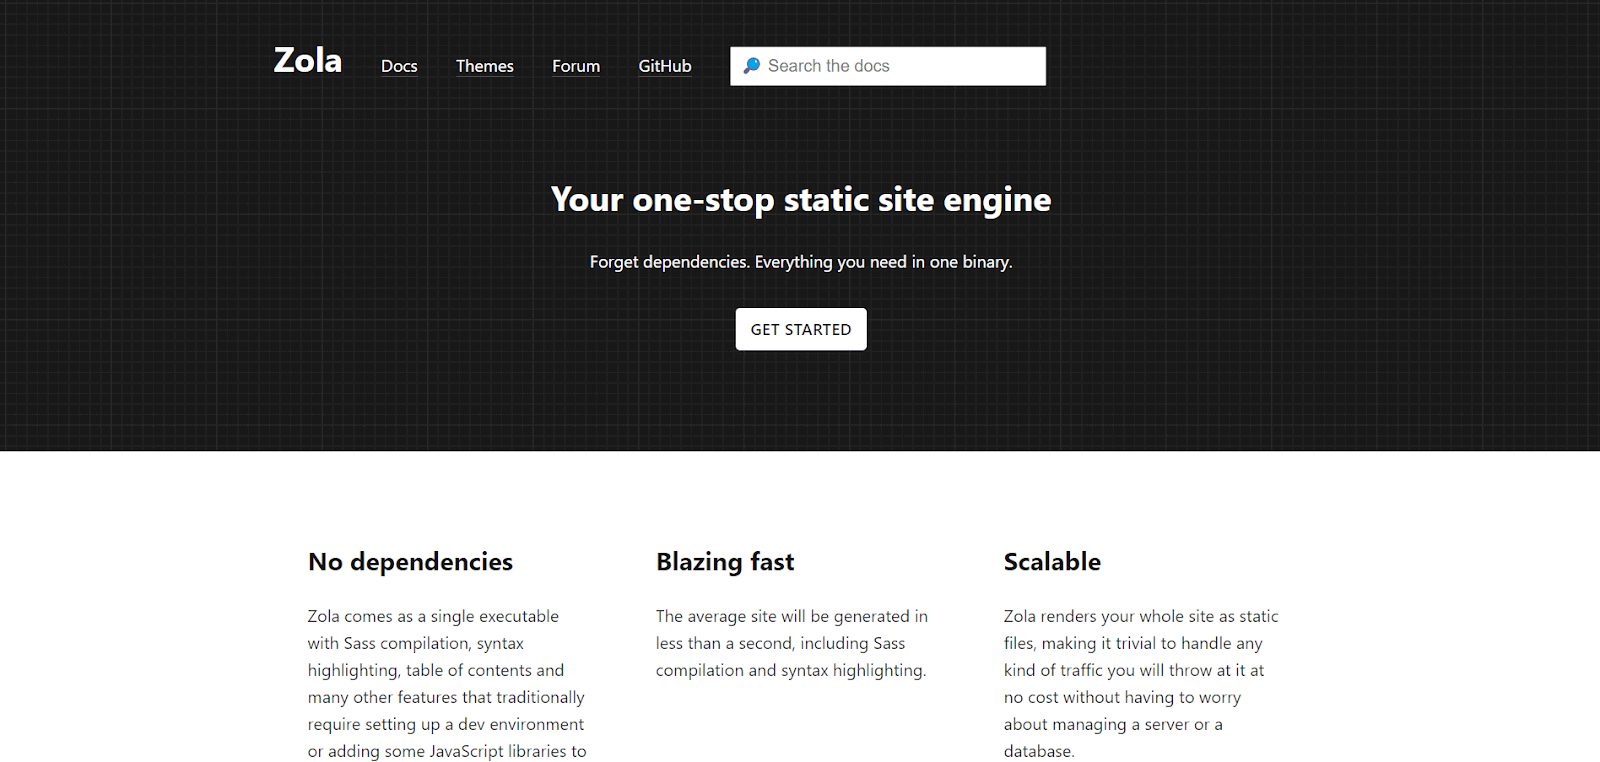 Zola, a cutting-edge and top static site